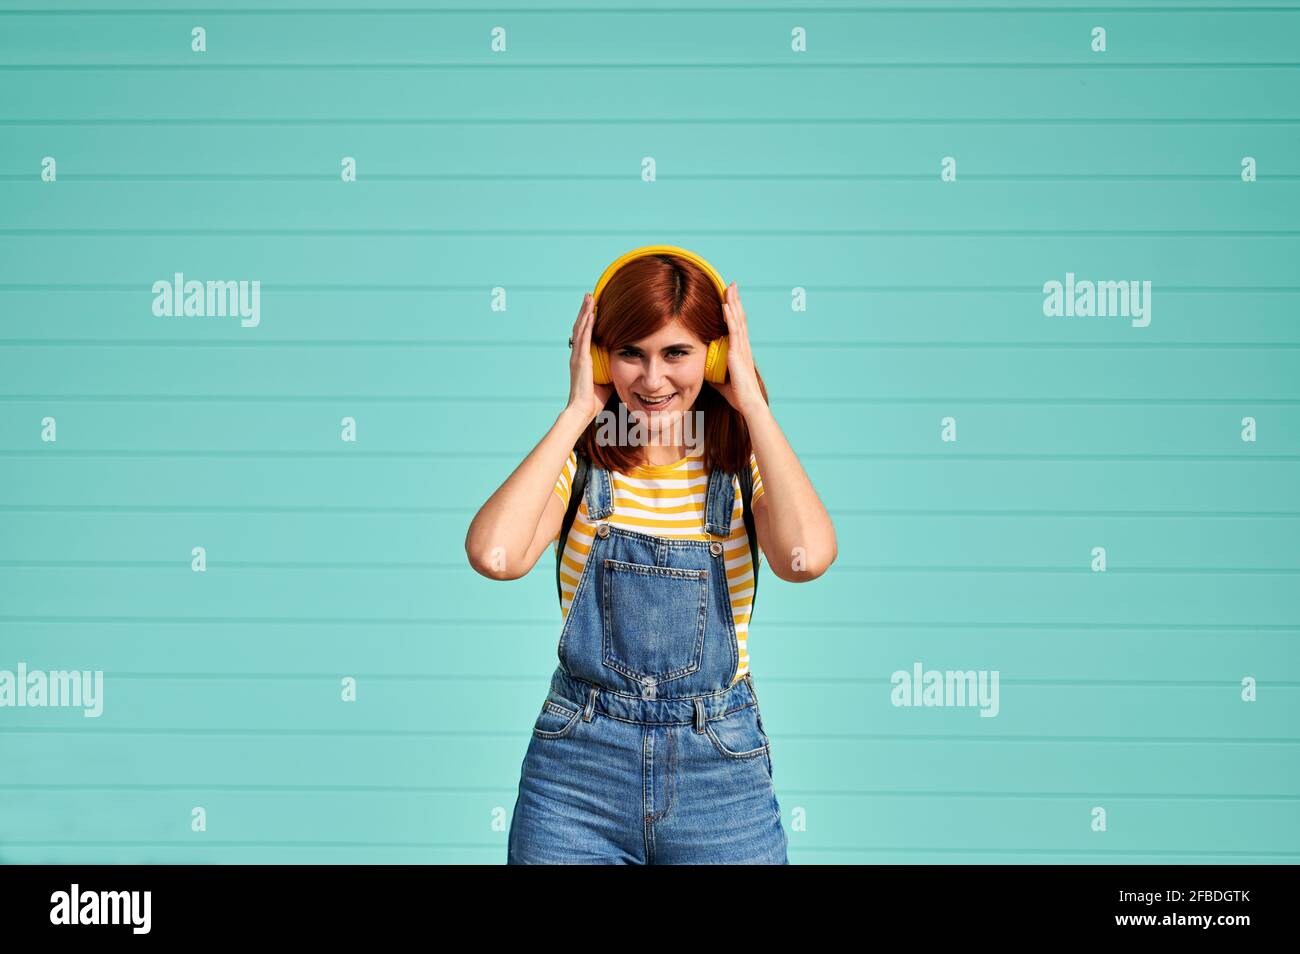 Young woman listening music through wireless headphones while standing in front of turquoise blue wall Stock Photo